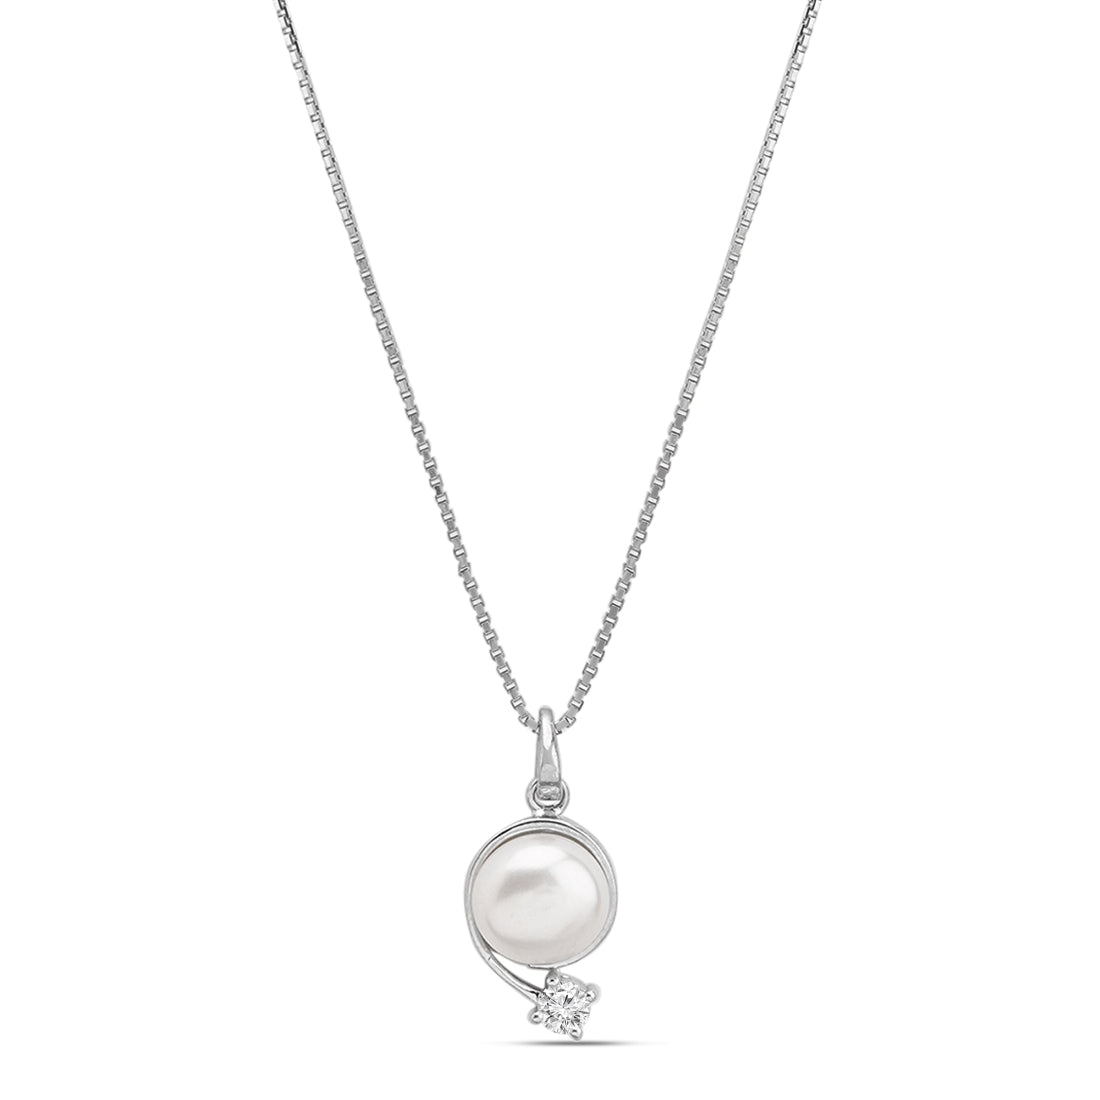 Pearl 925 Sterling Silver Pendant with Chain